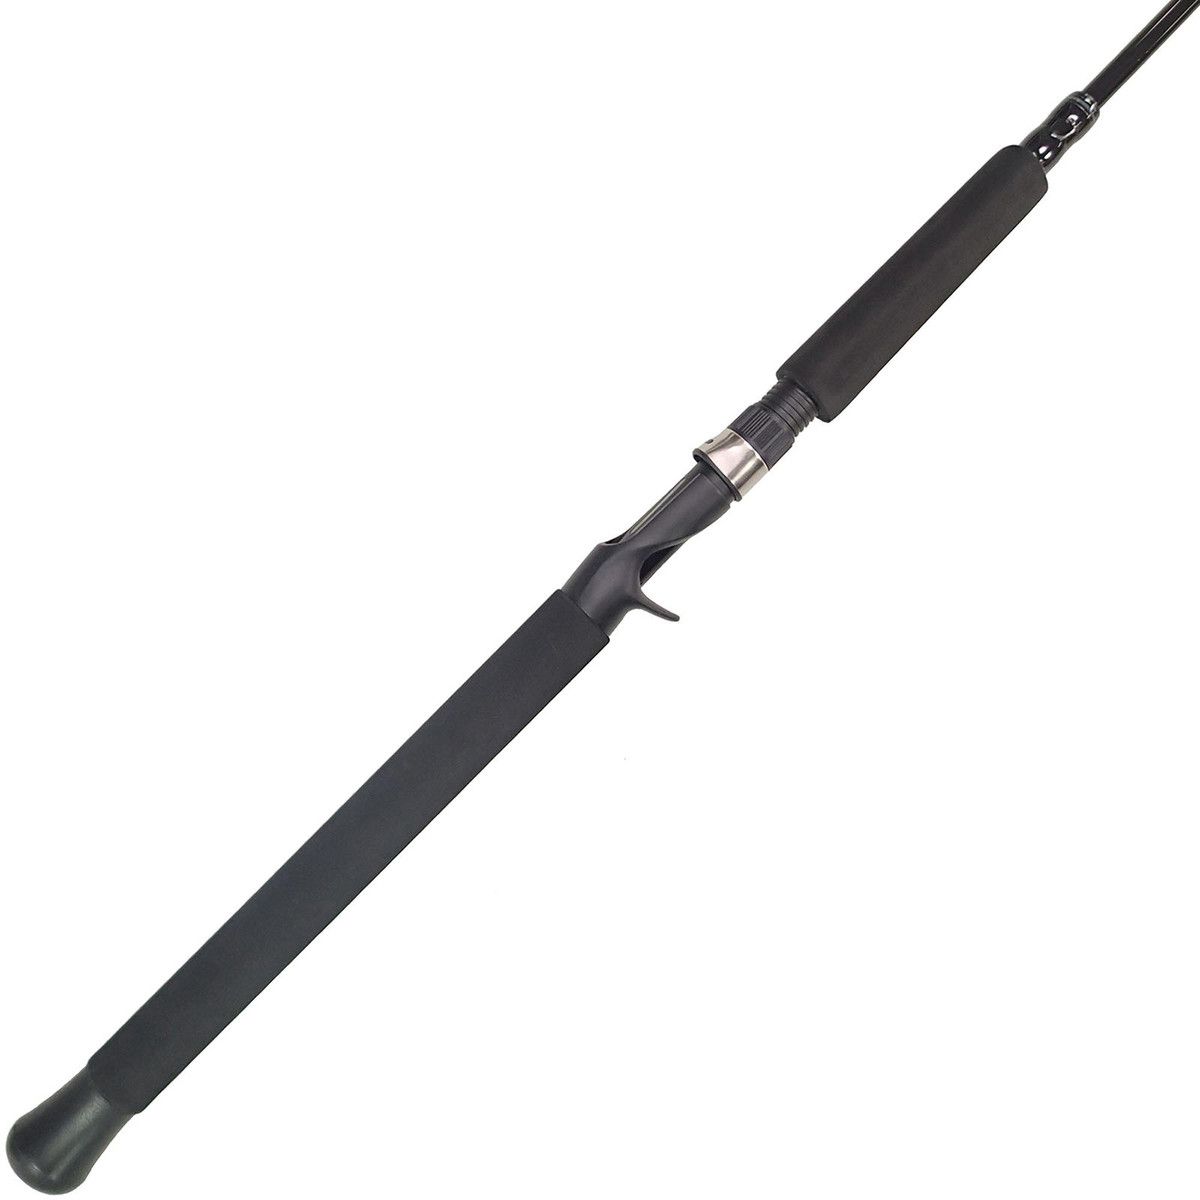 Photos - Other for Fishing Daiwa Great Lakes Trolling Rod 21DAIUGRTLK7FT6MFROD 